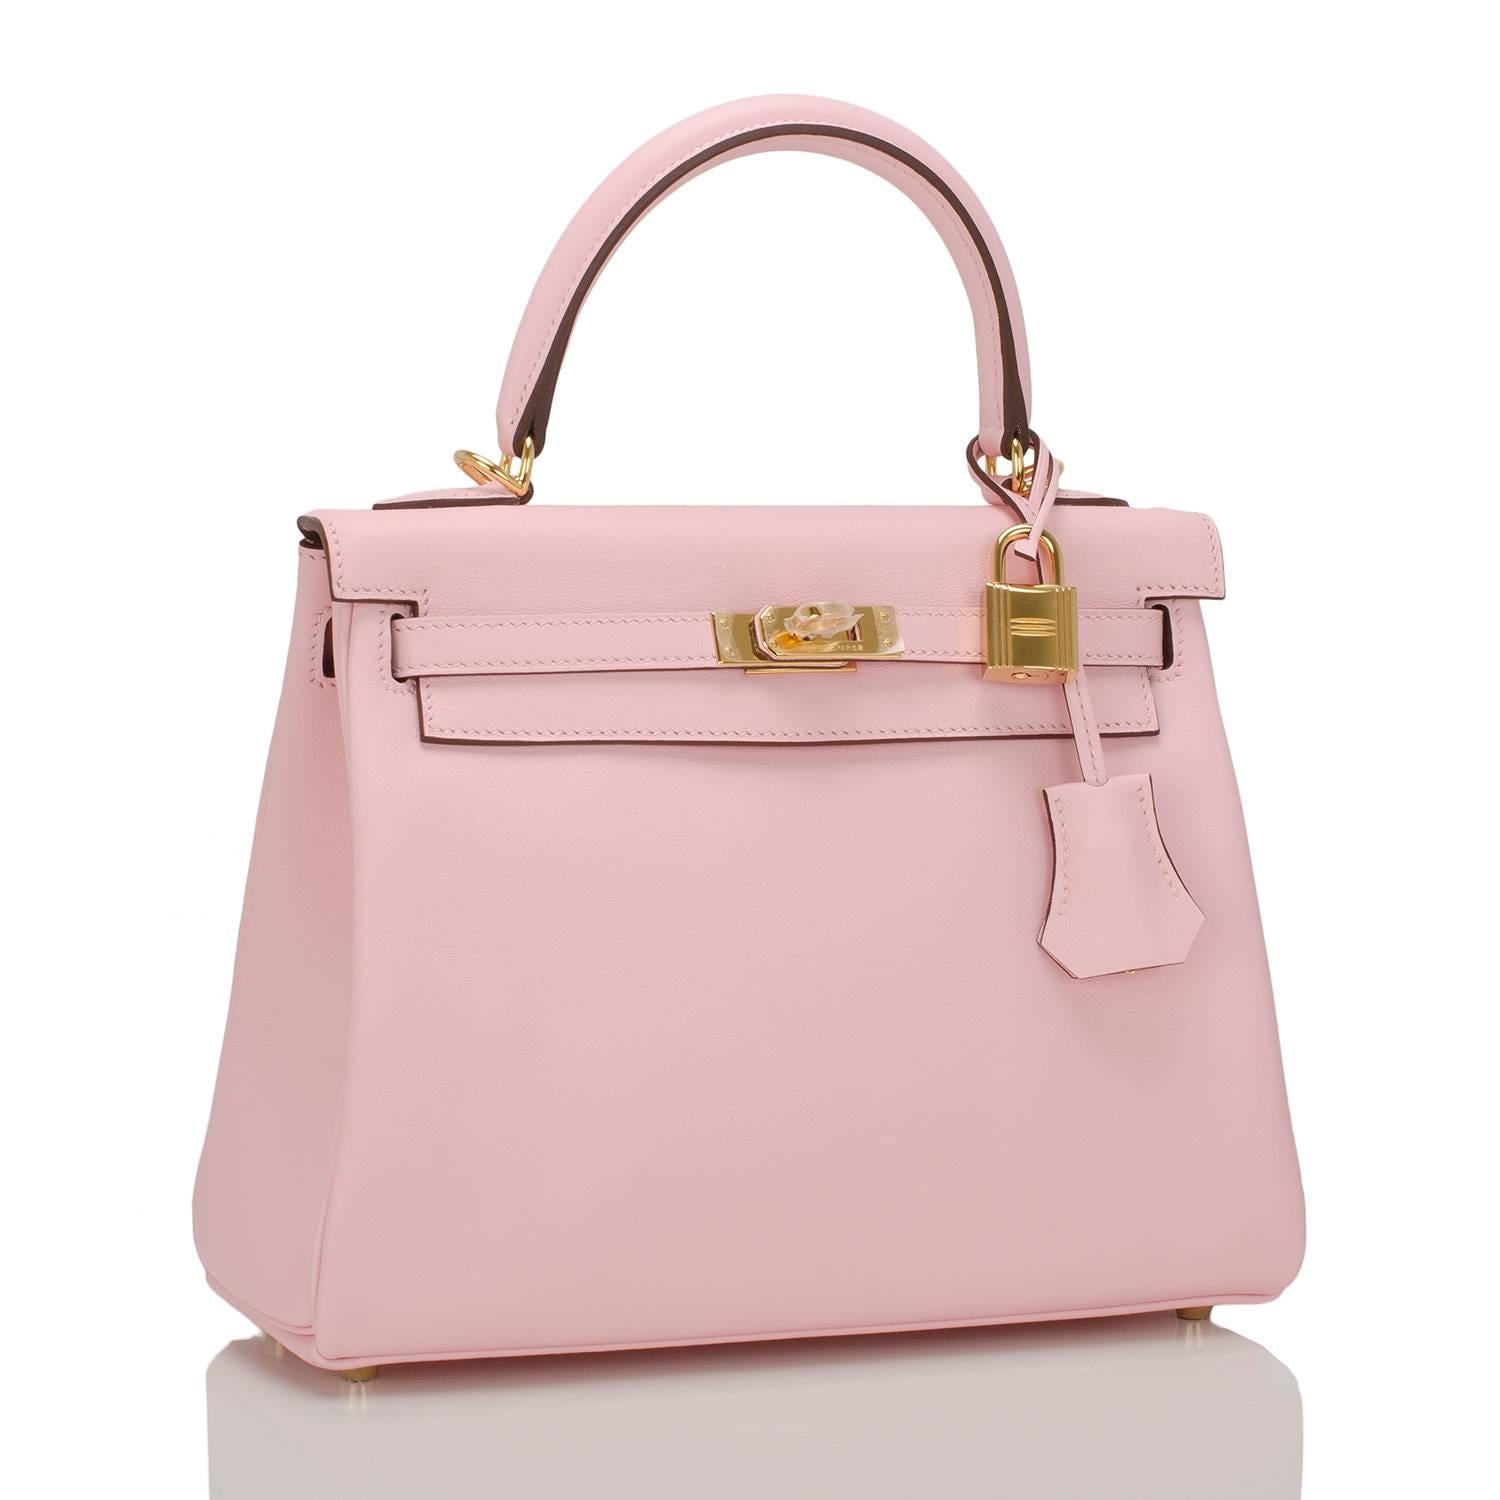 Hermes Rose Sakura Retourne Kelly 25cm in swift leather with gold hardware.

This Kelly in the relaxed Retourne style features tonal stitching, front toggle closure, clochette with lock and two keys, single rolled handle and optional shoulder